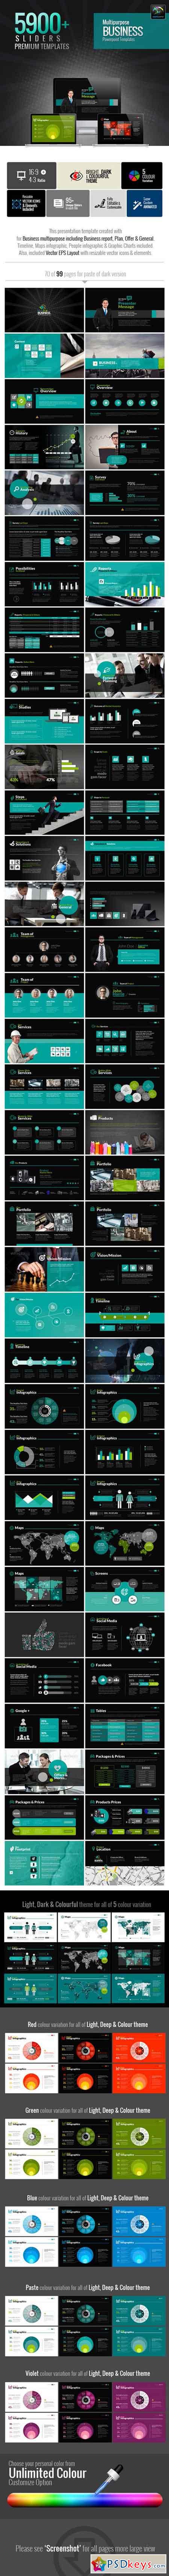 MultiEco Business Template 6436064